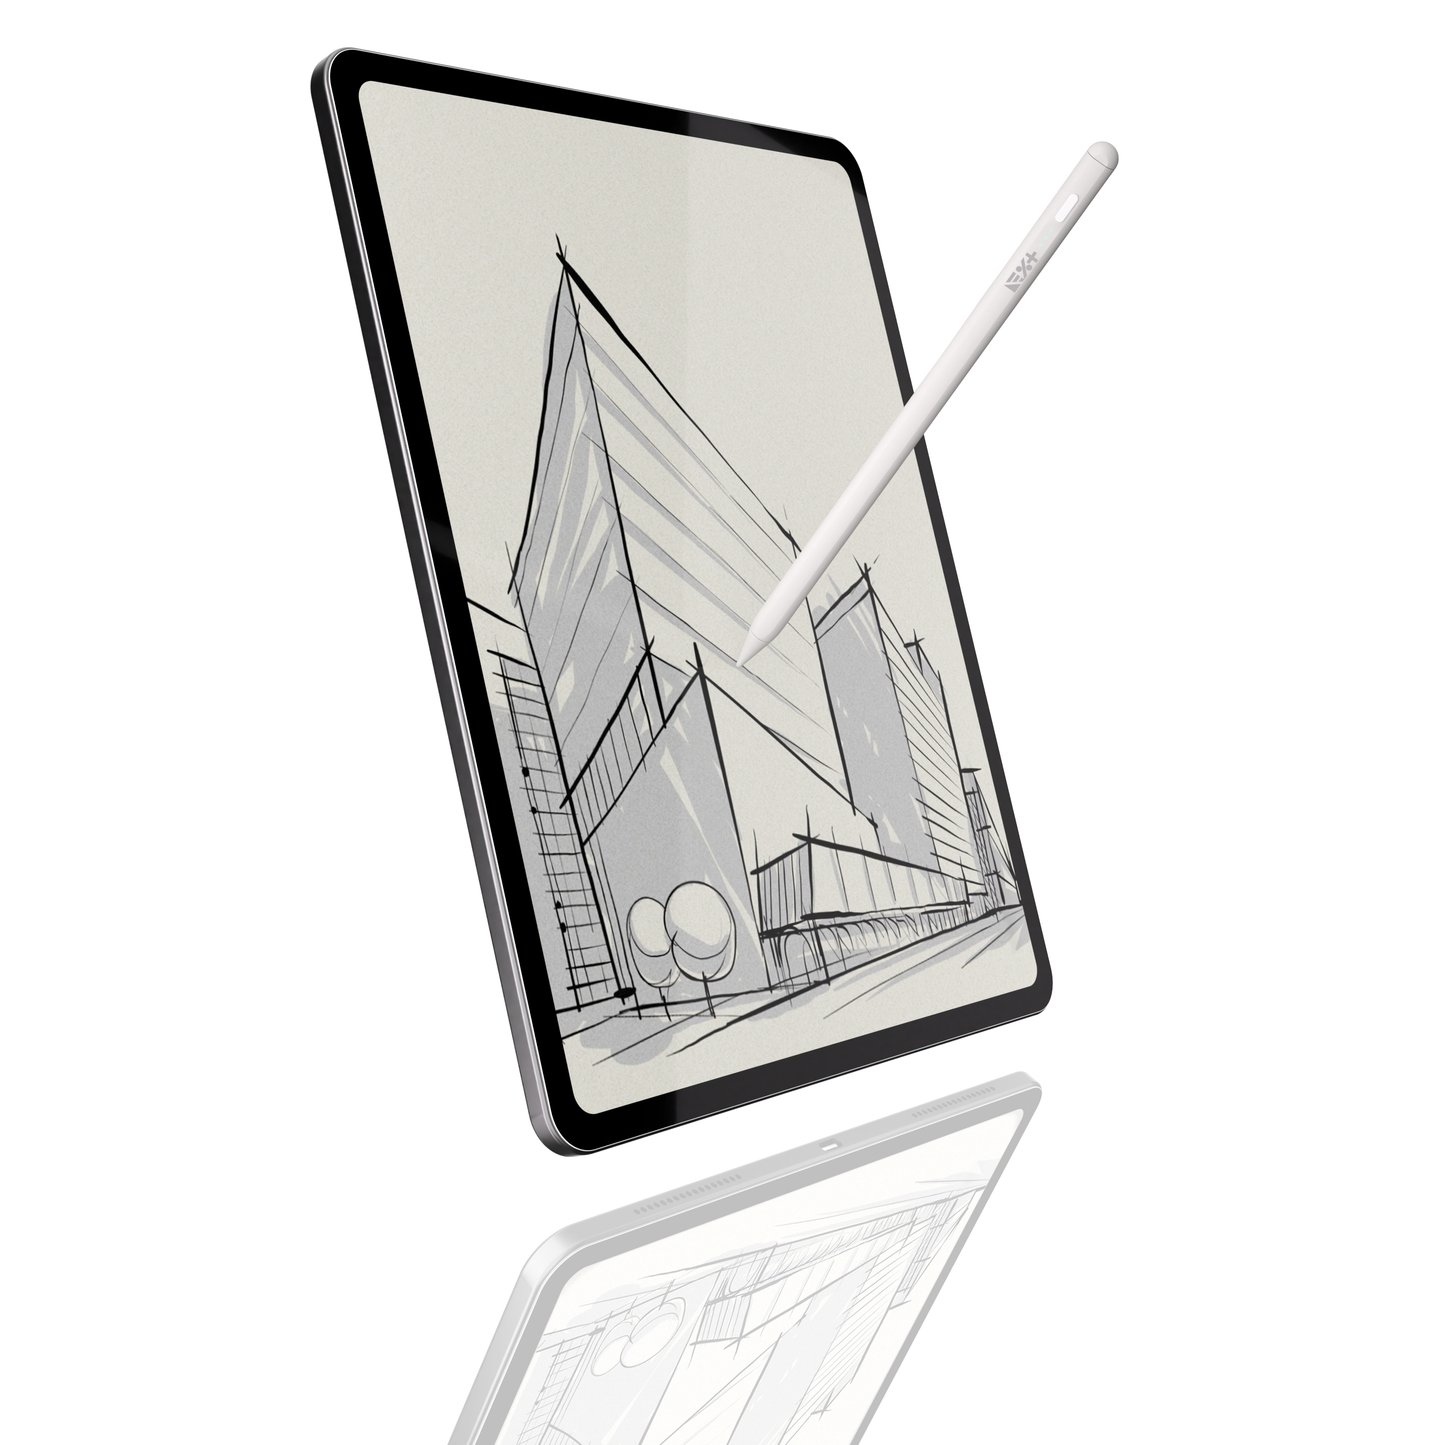 NEXT.ONE  Scribble PaperScreen Protector - iPad Pro 11" (2020)